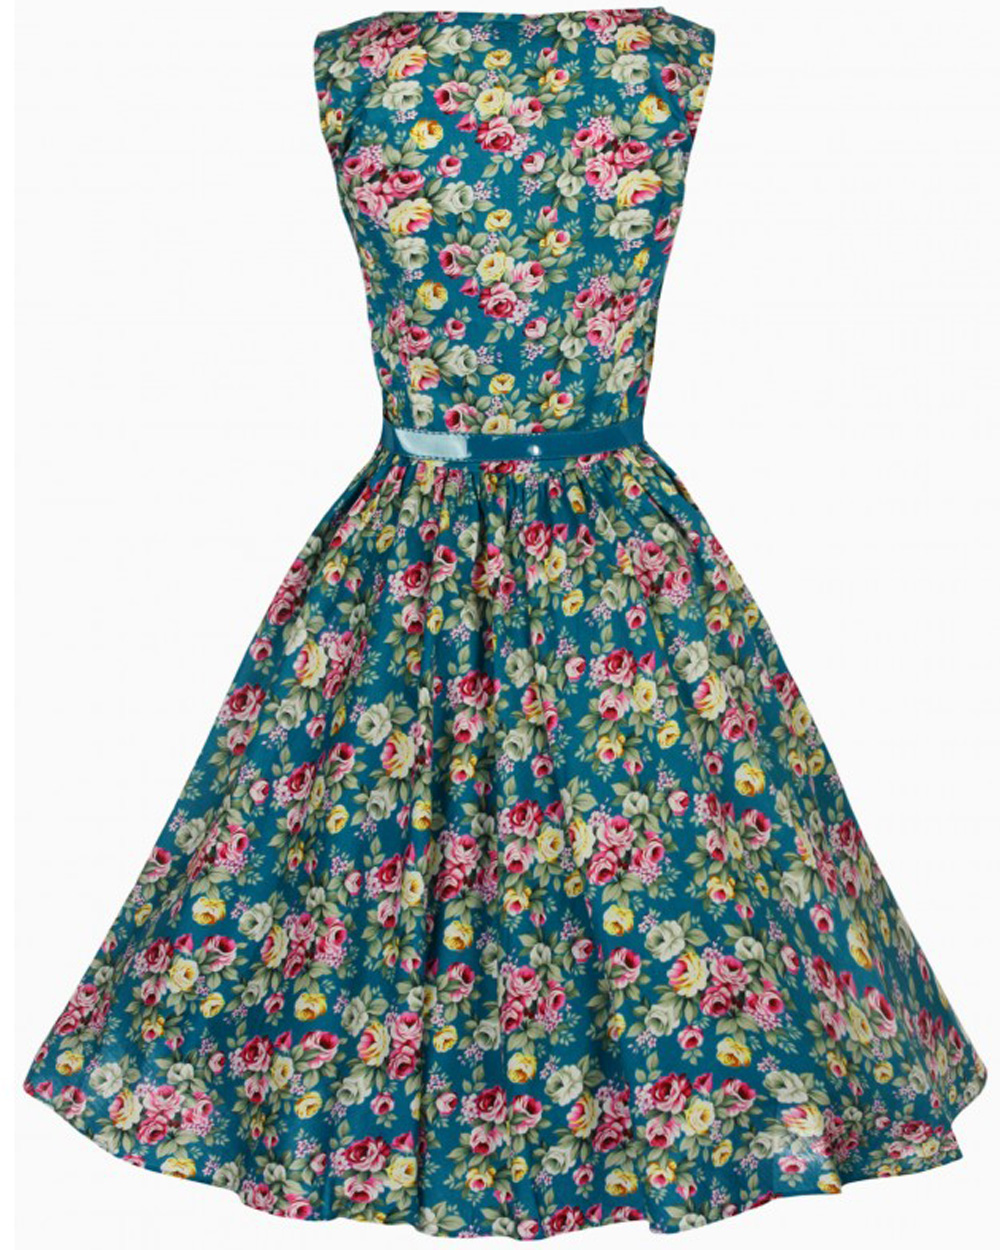 RKB6 Lindy Bop Audrey Turquoise Floral Swing Party Dress 50s Rockabilly ...